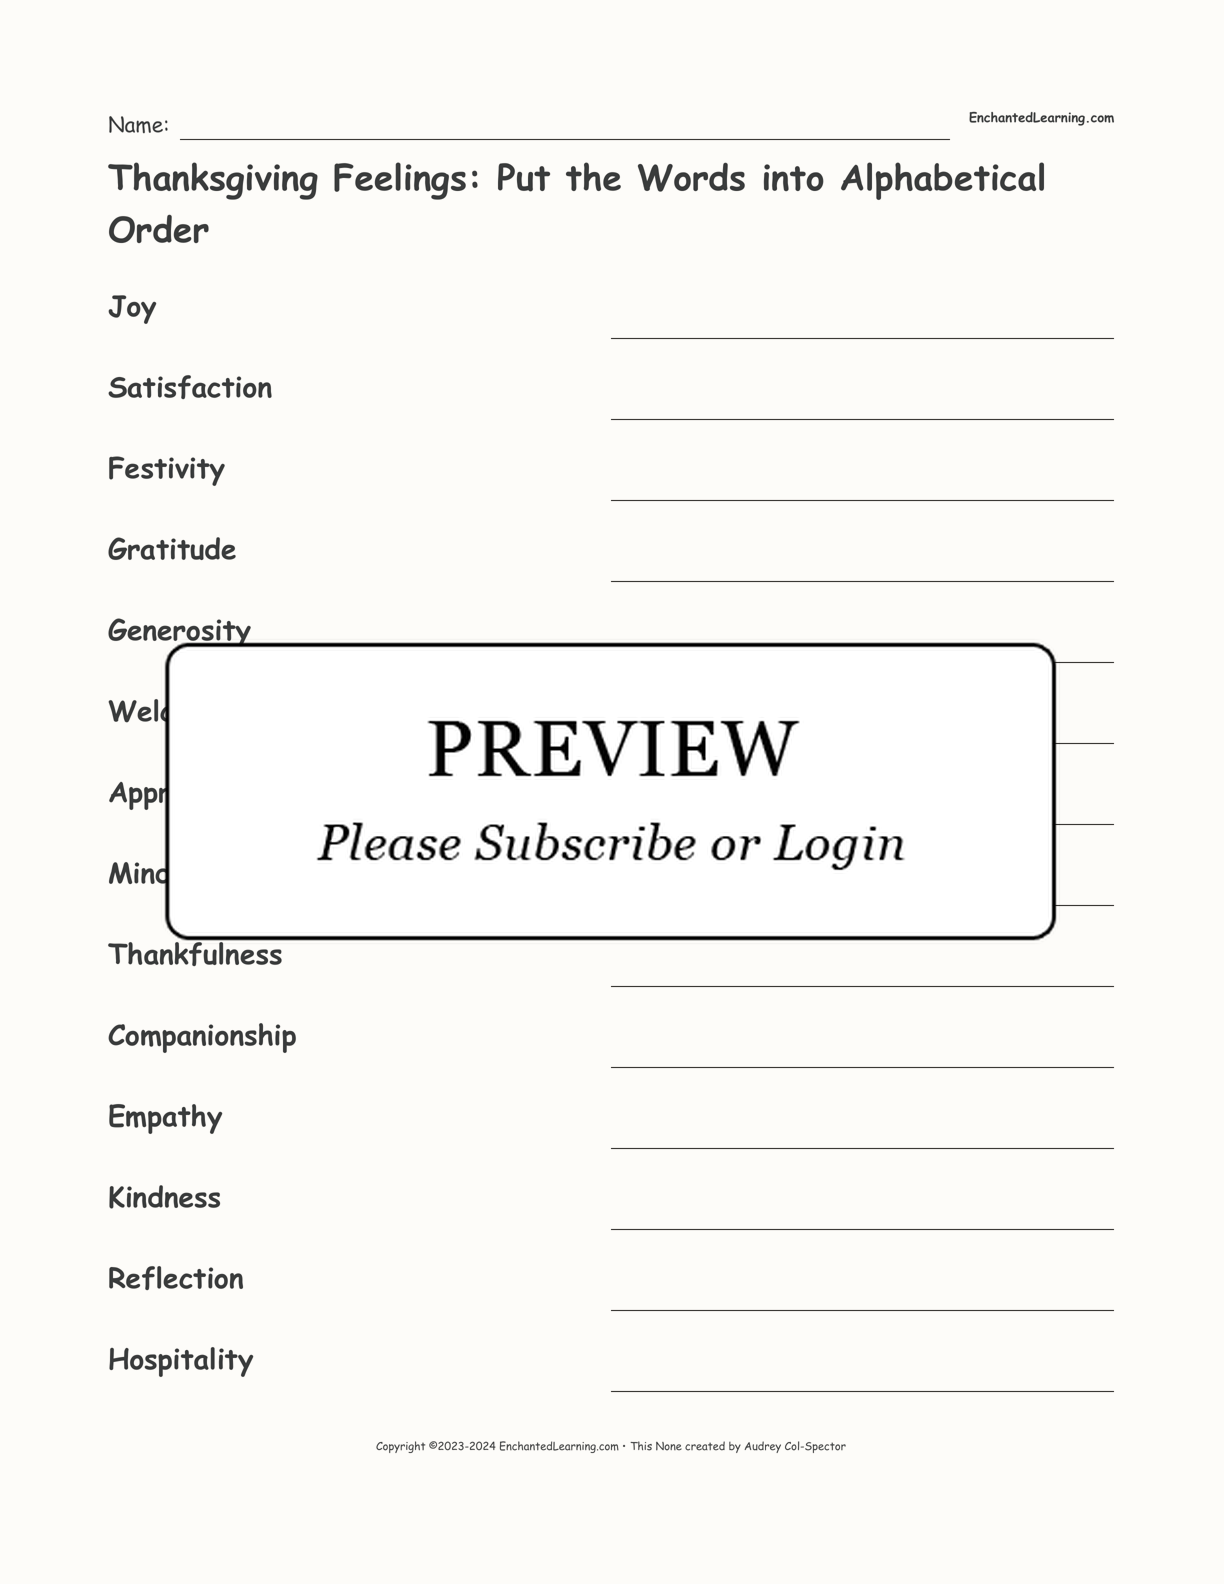 Thanksgiving Feelings: Put the Words into Alphabetical Order interactive worksheet page 1